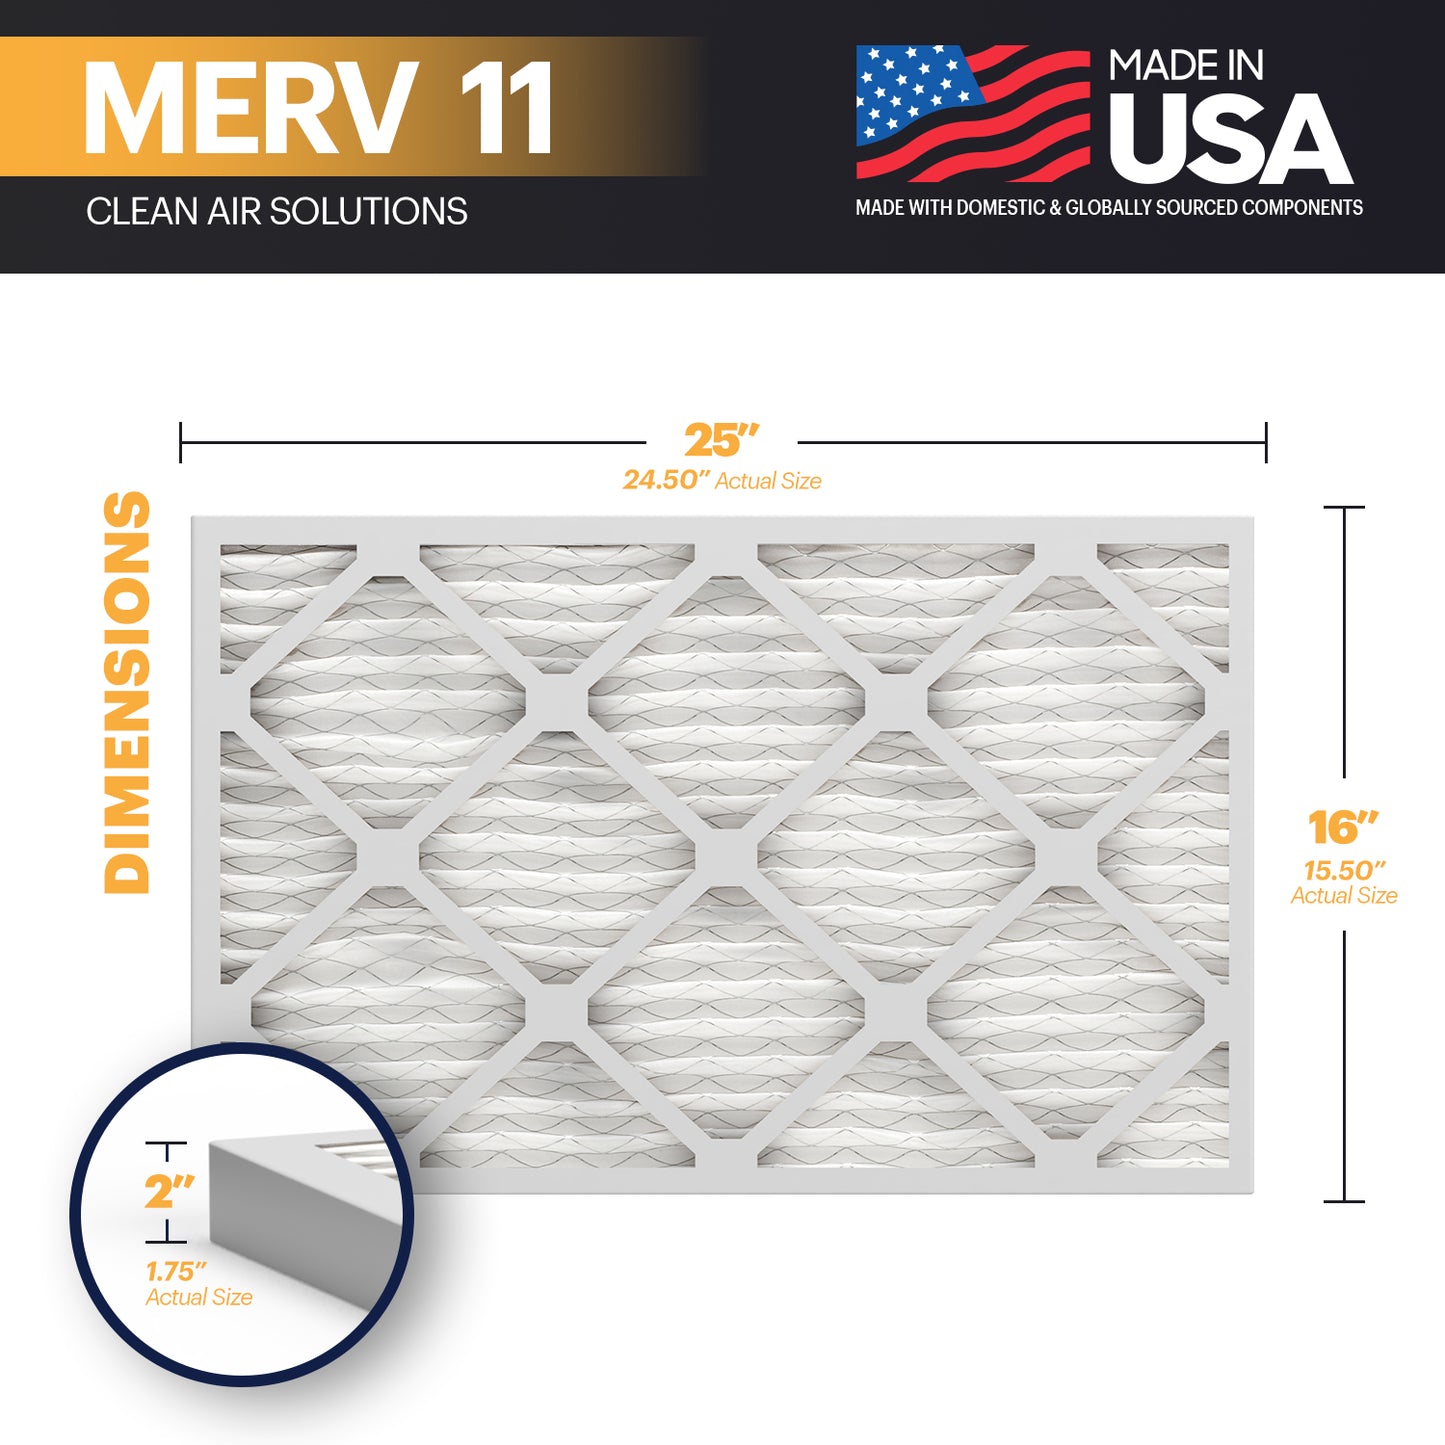 BNX TruFilter 16x25x2 MERV 11 Pleated Air Filter – Made in USA (2-Pack)